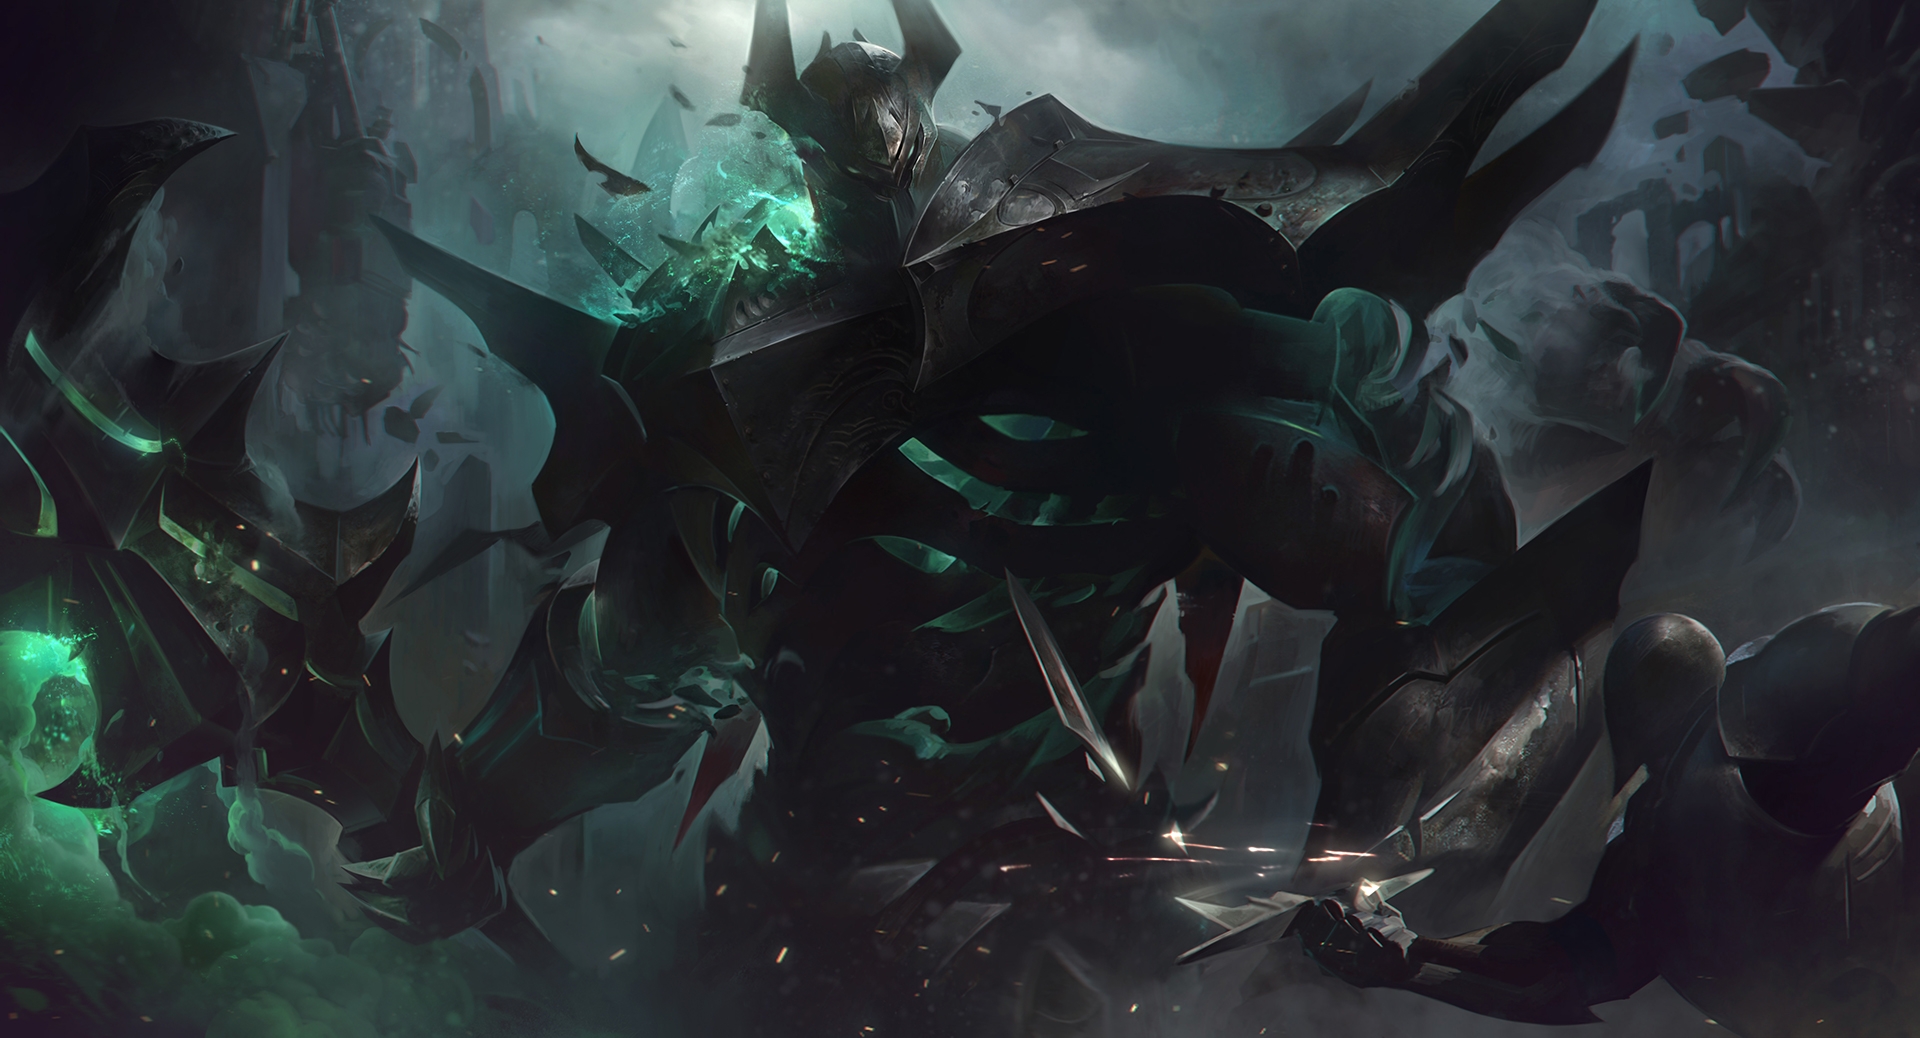 Mordekaiser and his army  Strategy card games, One liner jokes, League of  legends universe